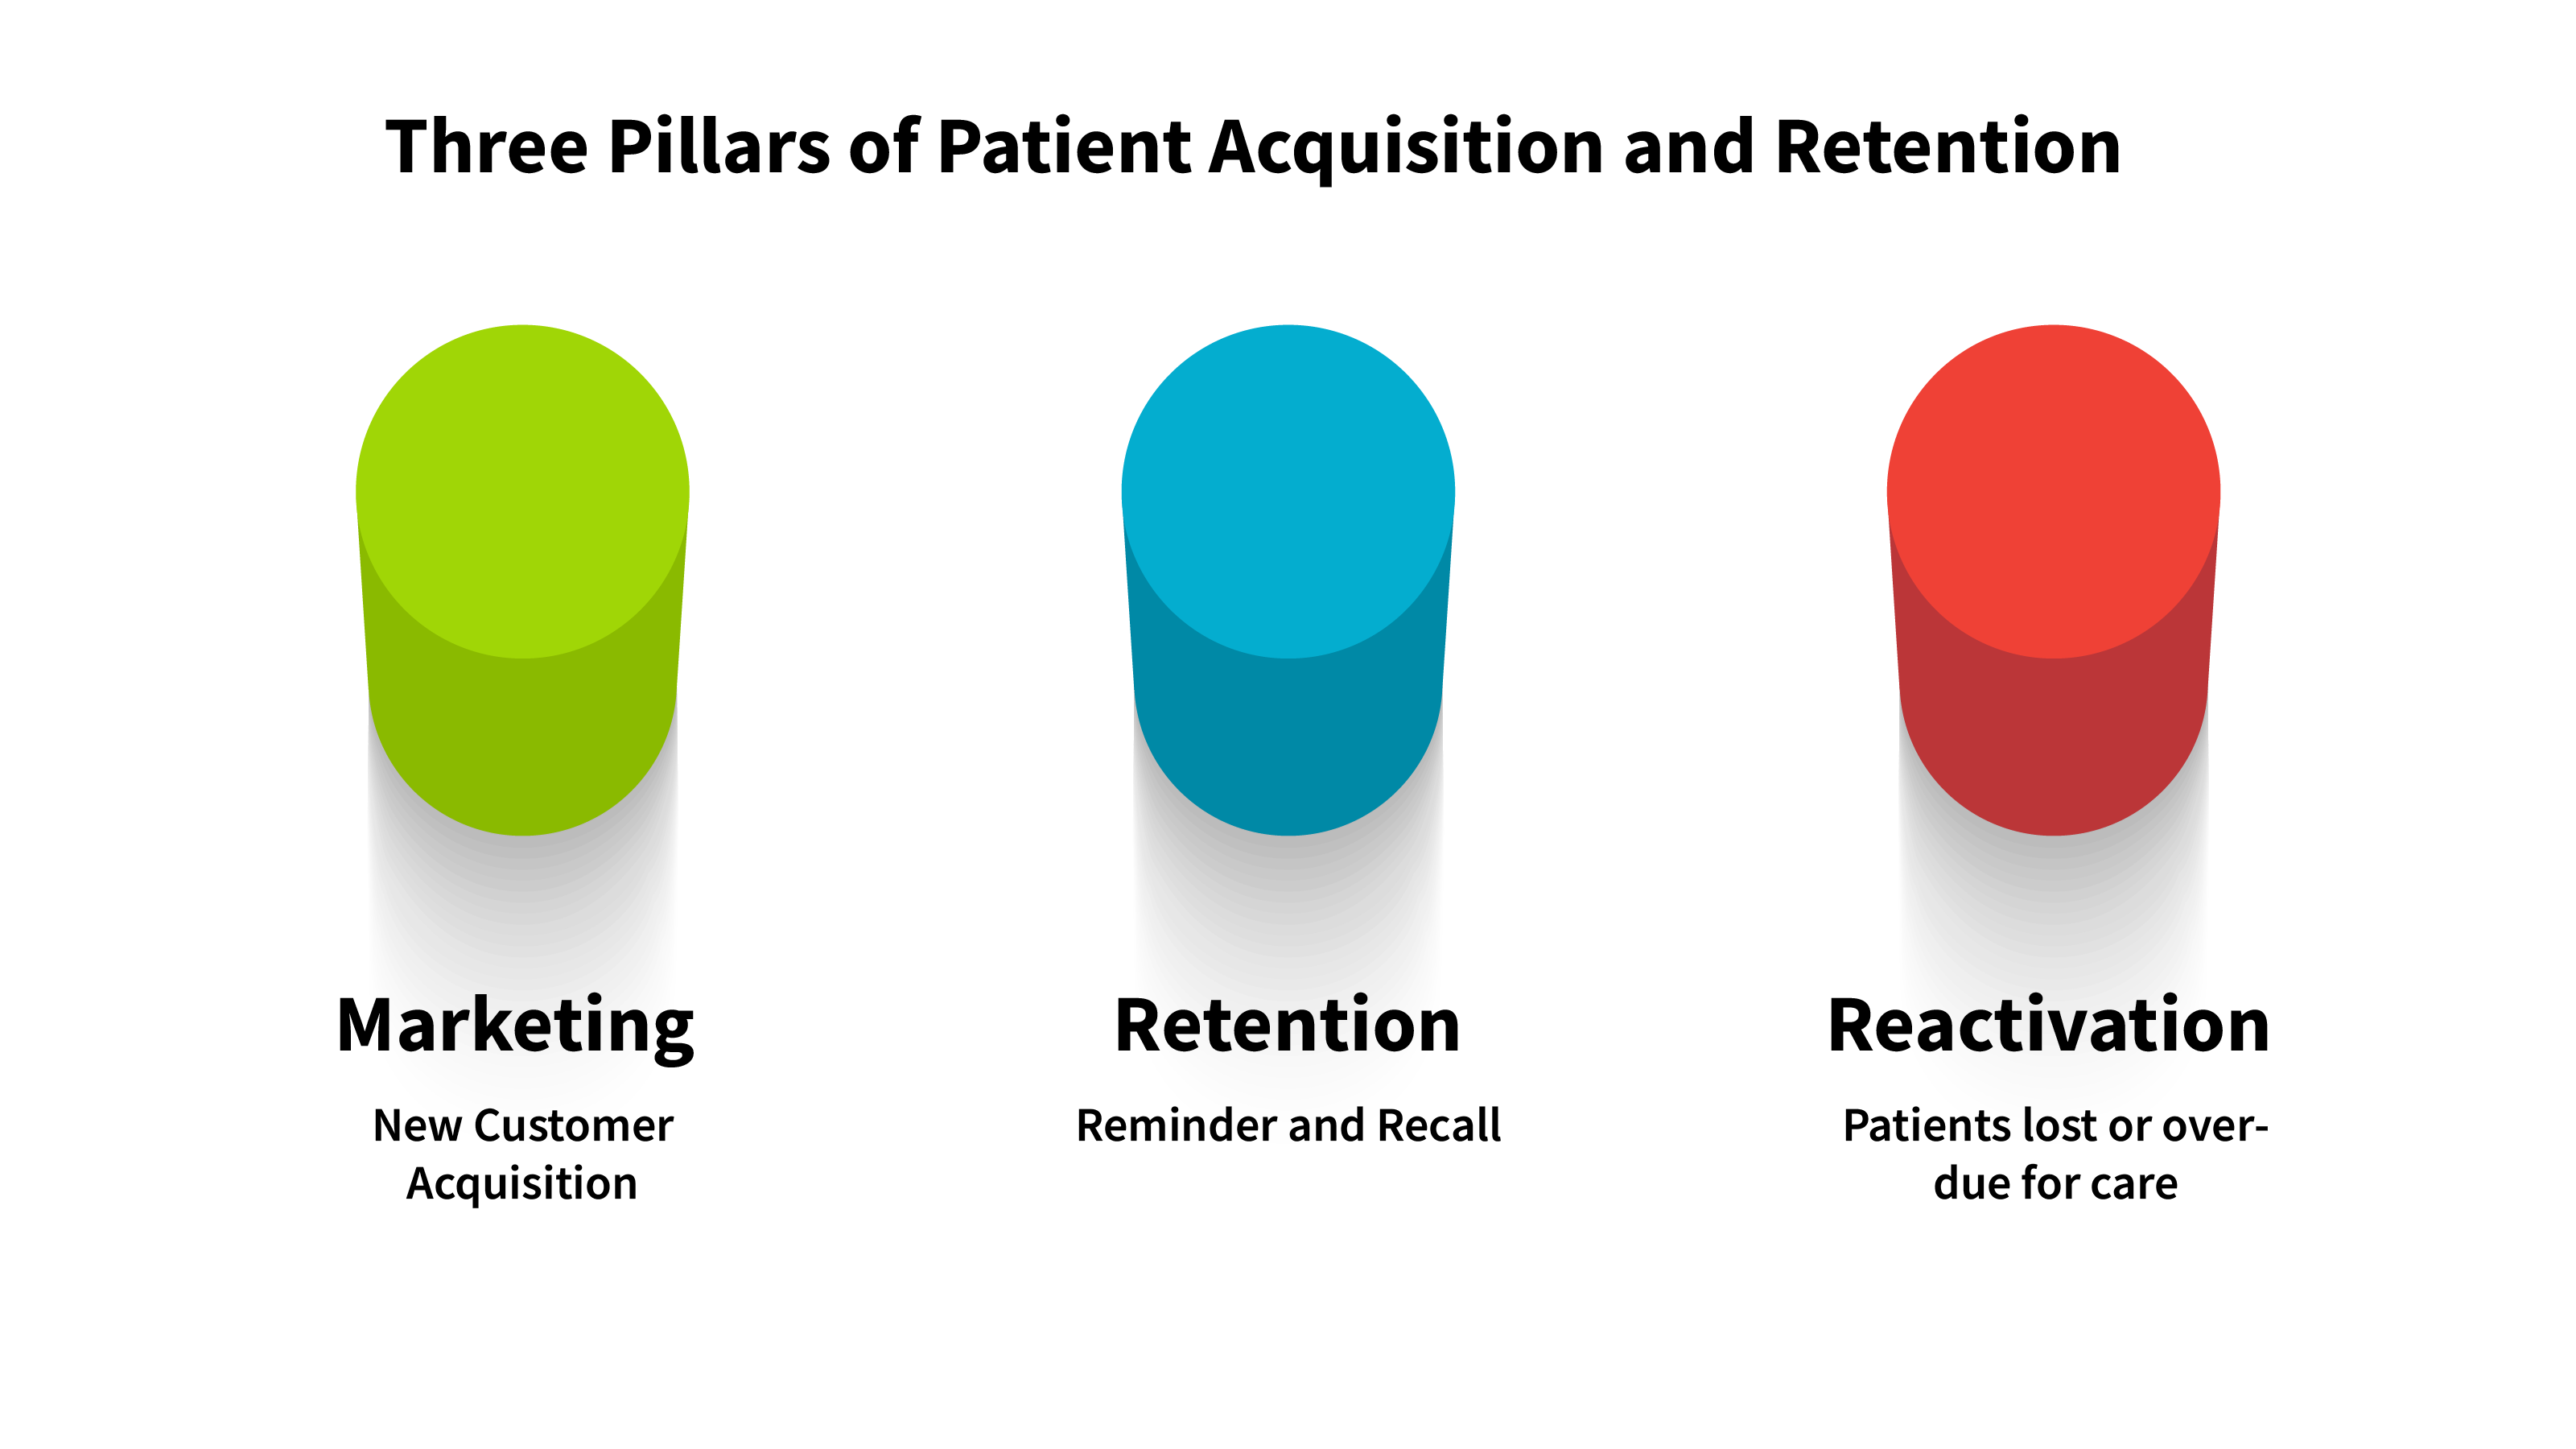 Three Pillars of Patient Retention and Acquisition